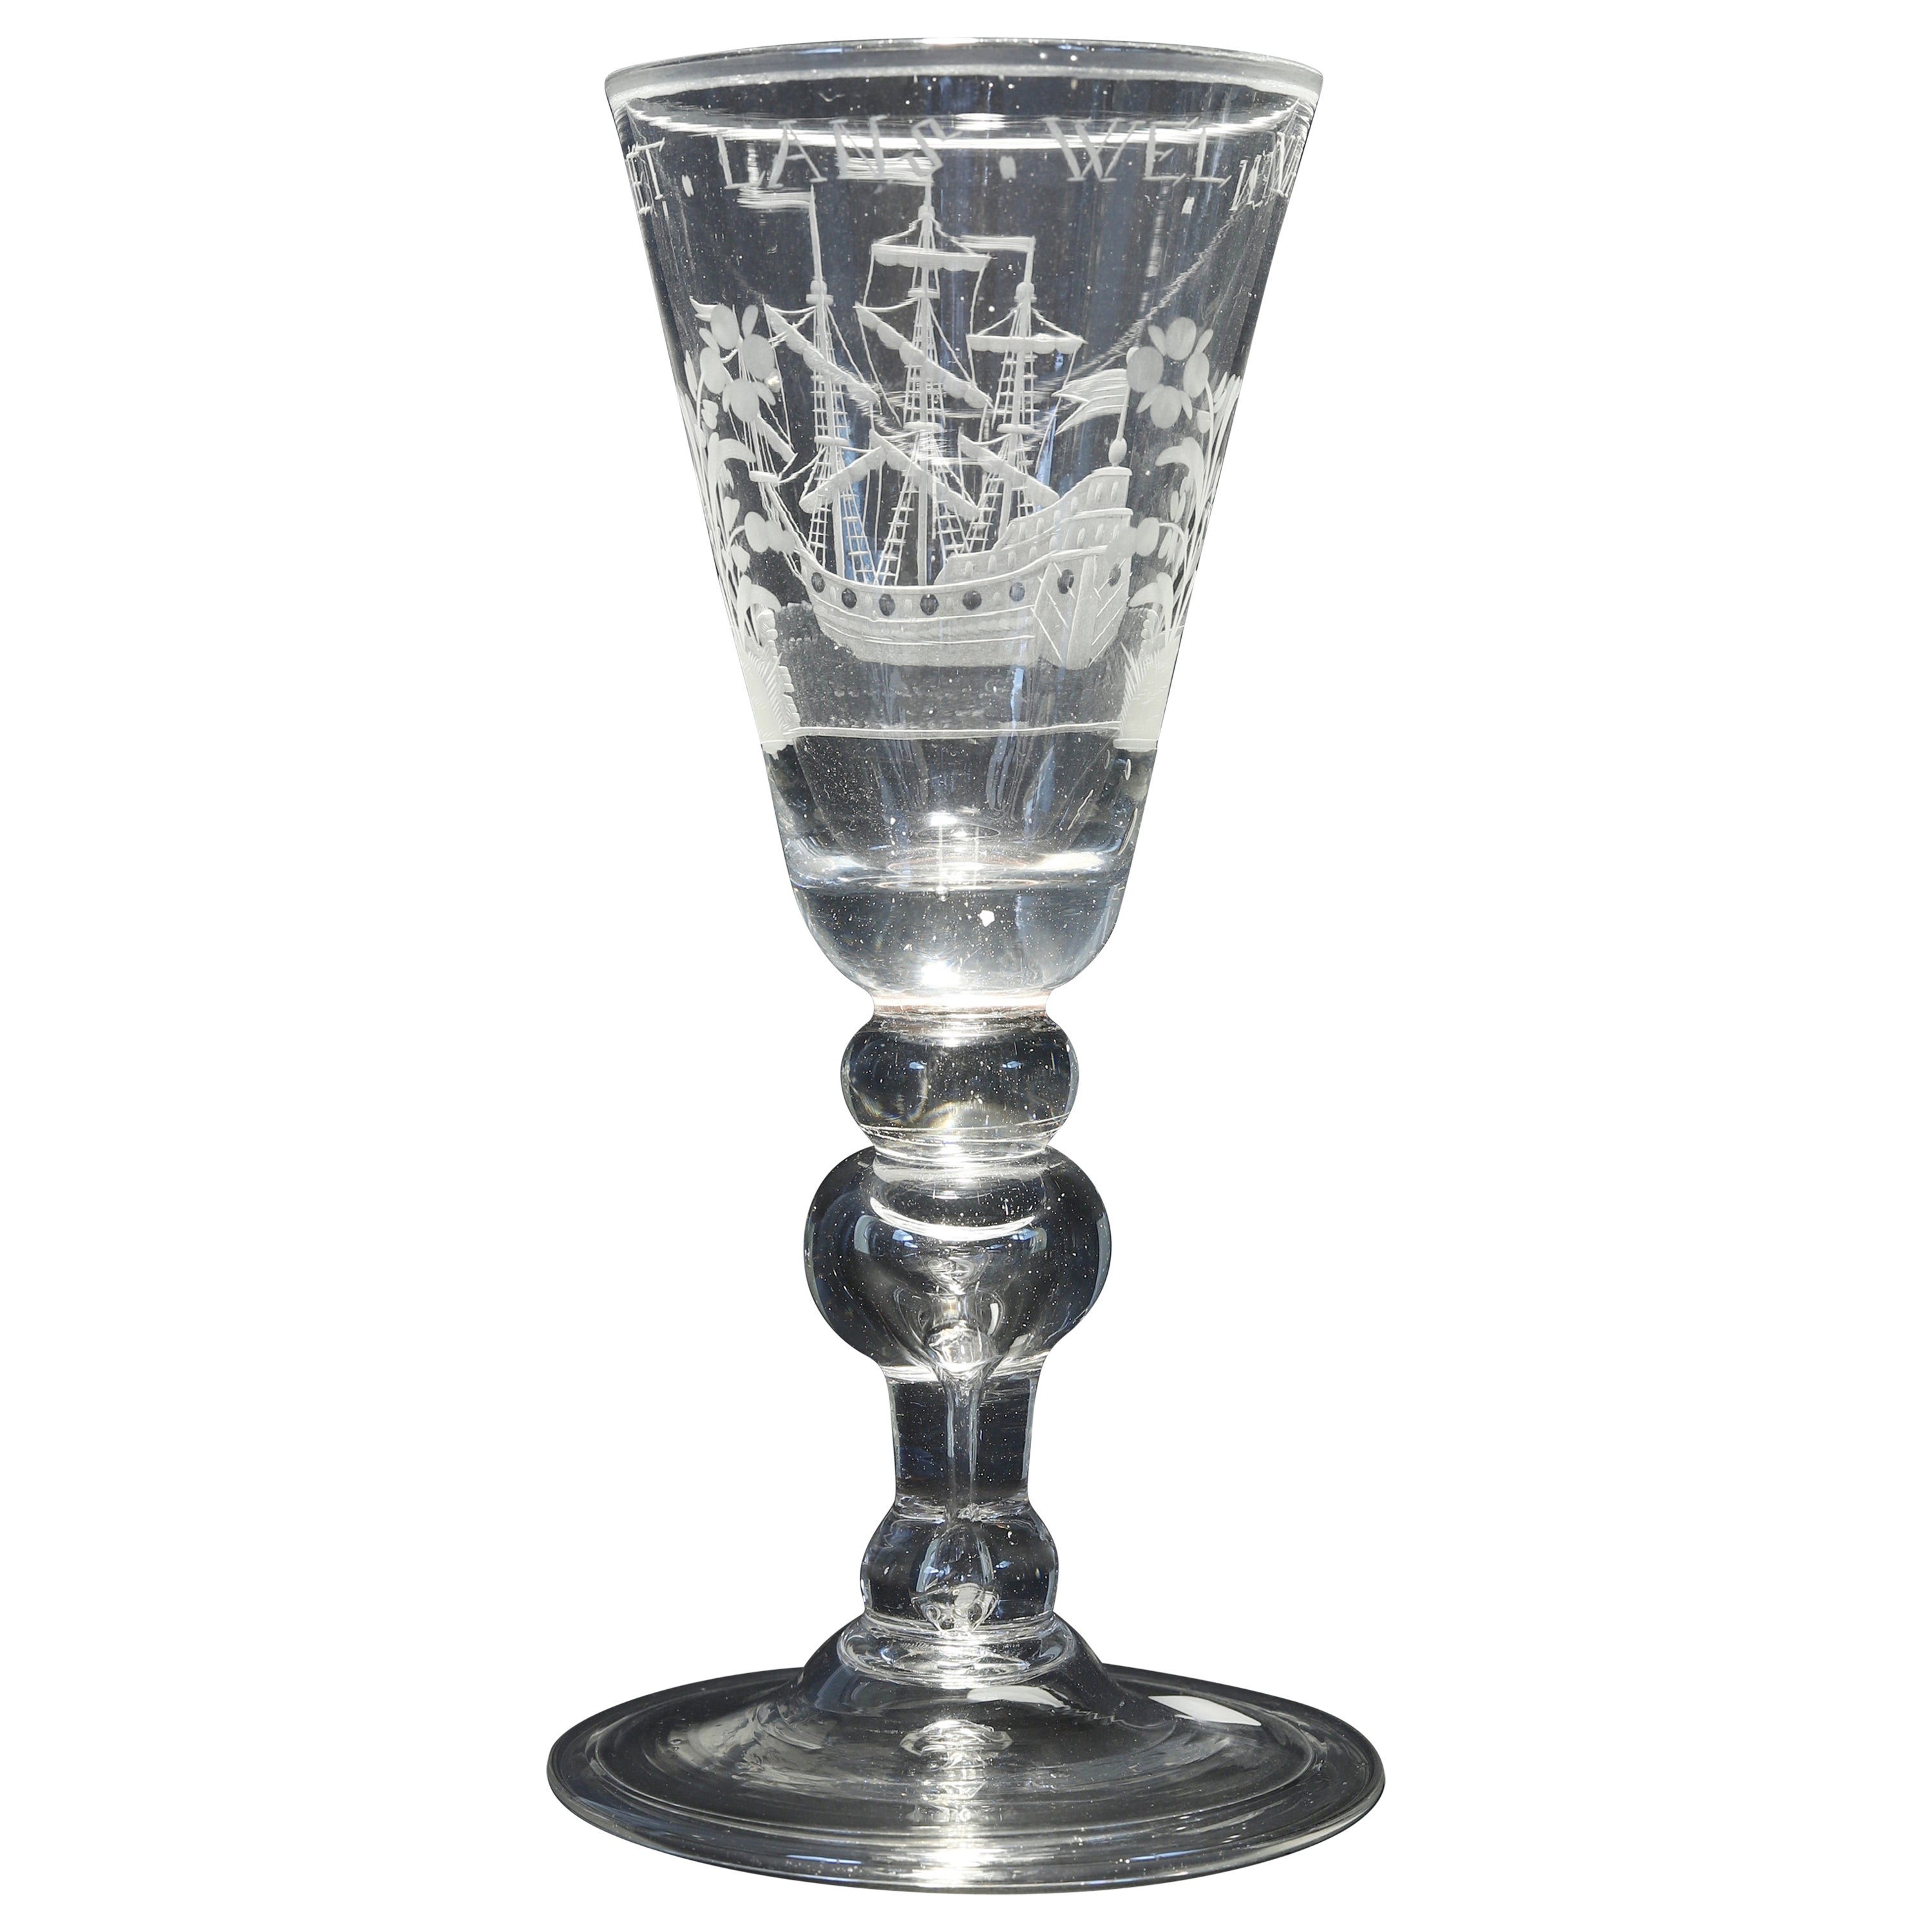 A Dutch Engraved Baluster, Prosperity of the Country, Wine Glass, 18th Century